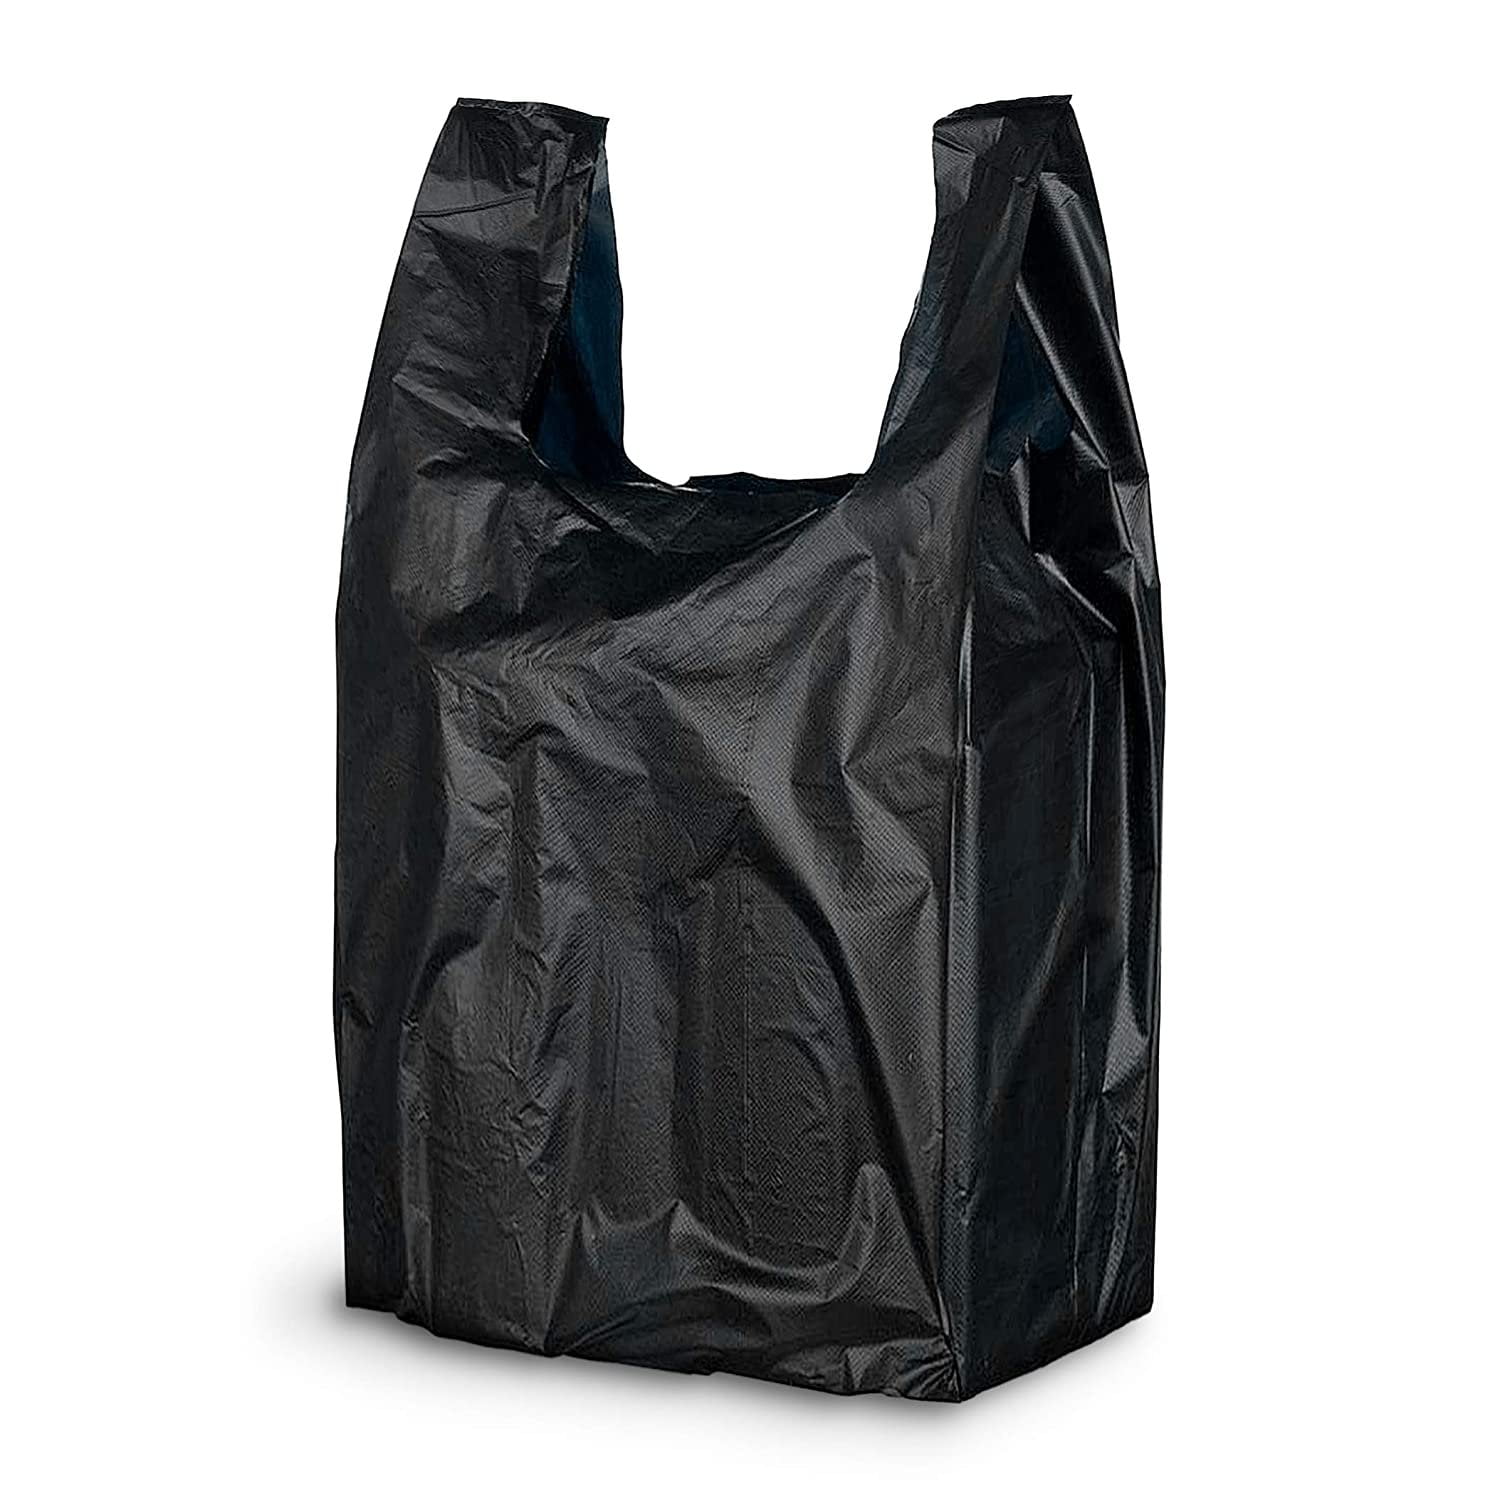 Pack of 2000 Black Plastic Bags 6 x 3 x 12. Plain Carry-Out T-Shirt ...